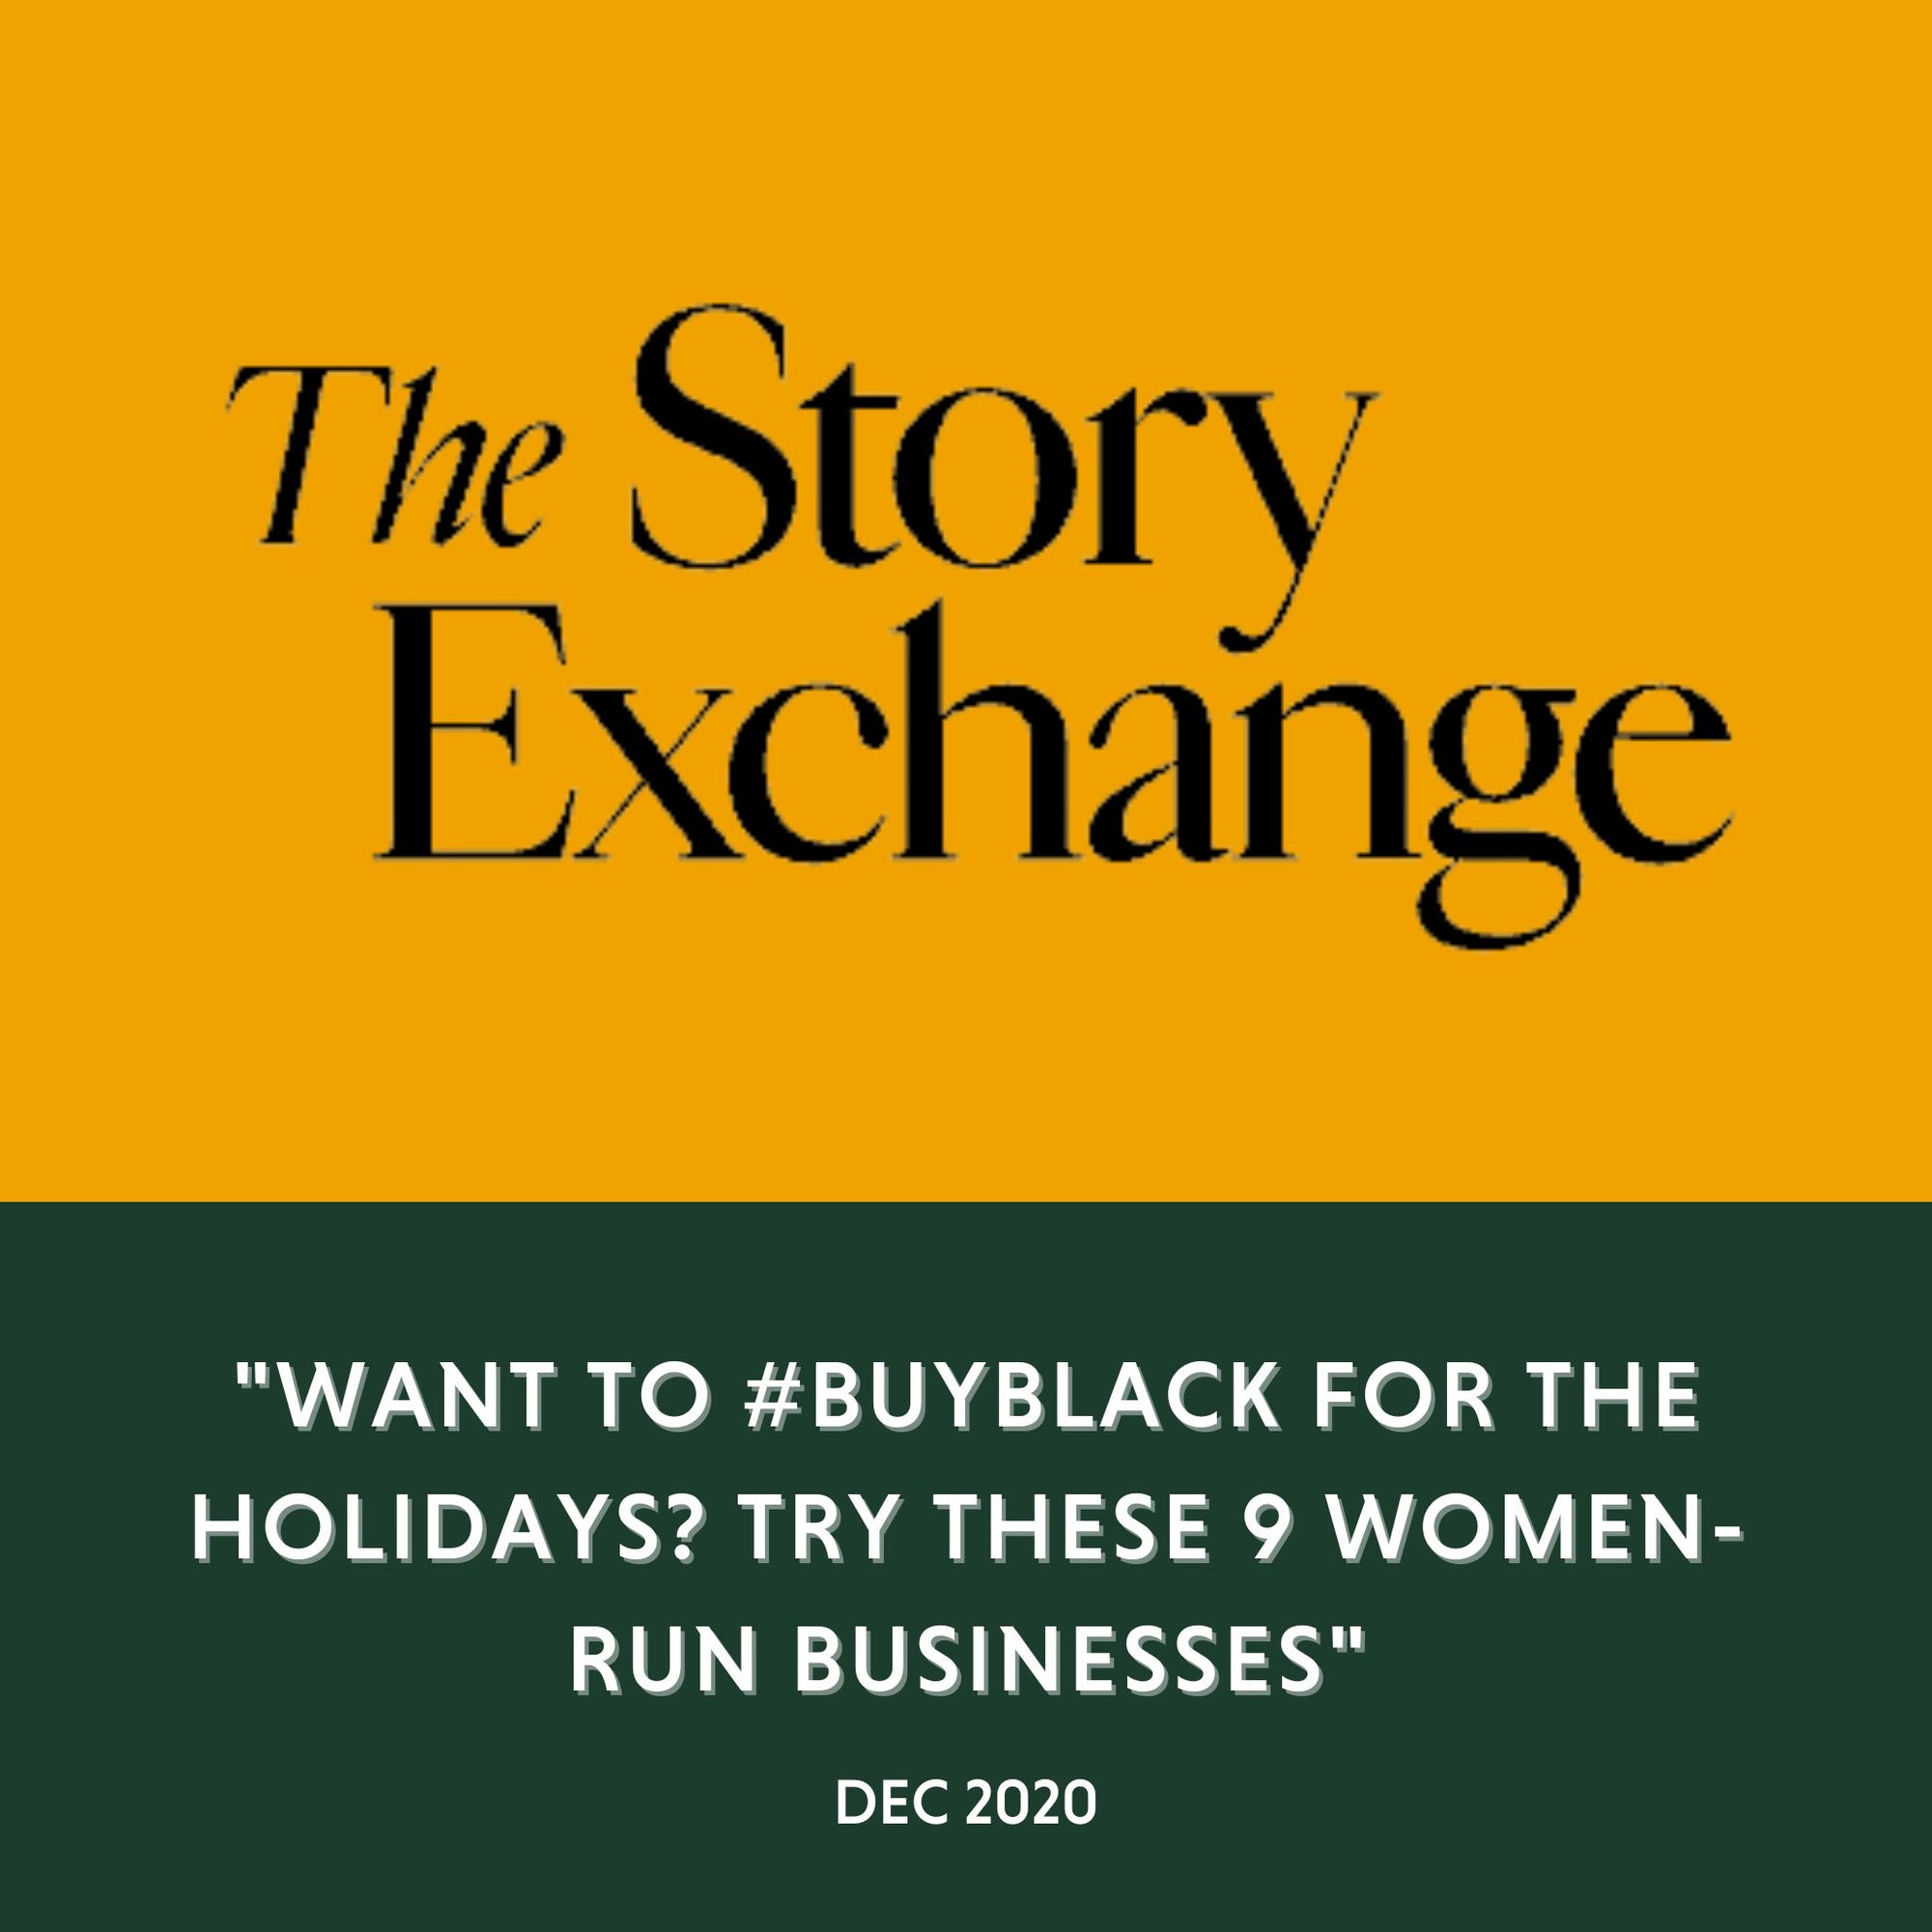 The Story Exchange - "Want to #BuyBlack for the Holidays? Try These 9 Women-Run Businesses" - Dec 2020